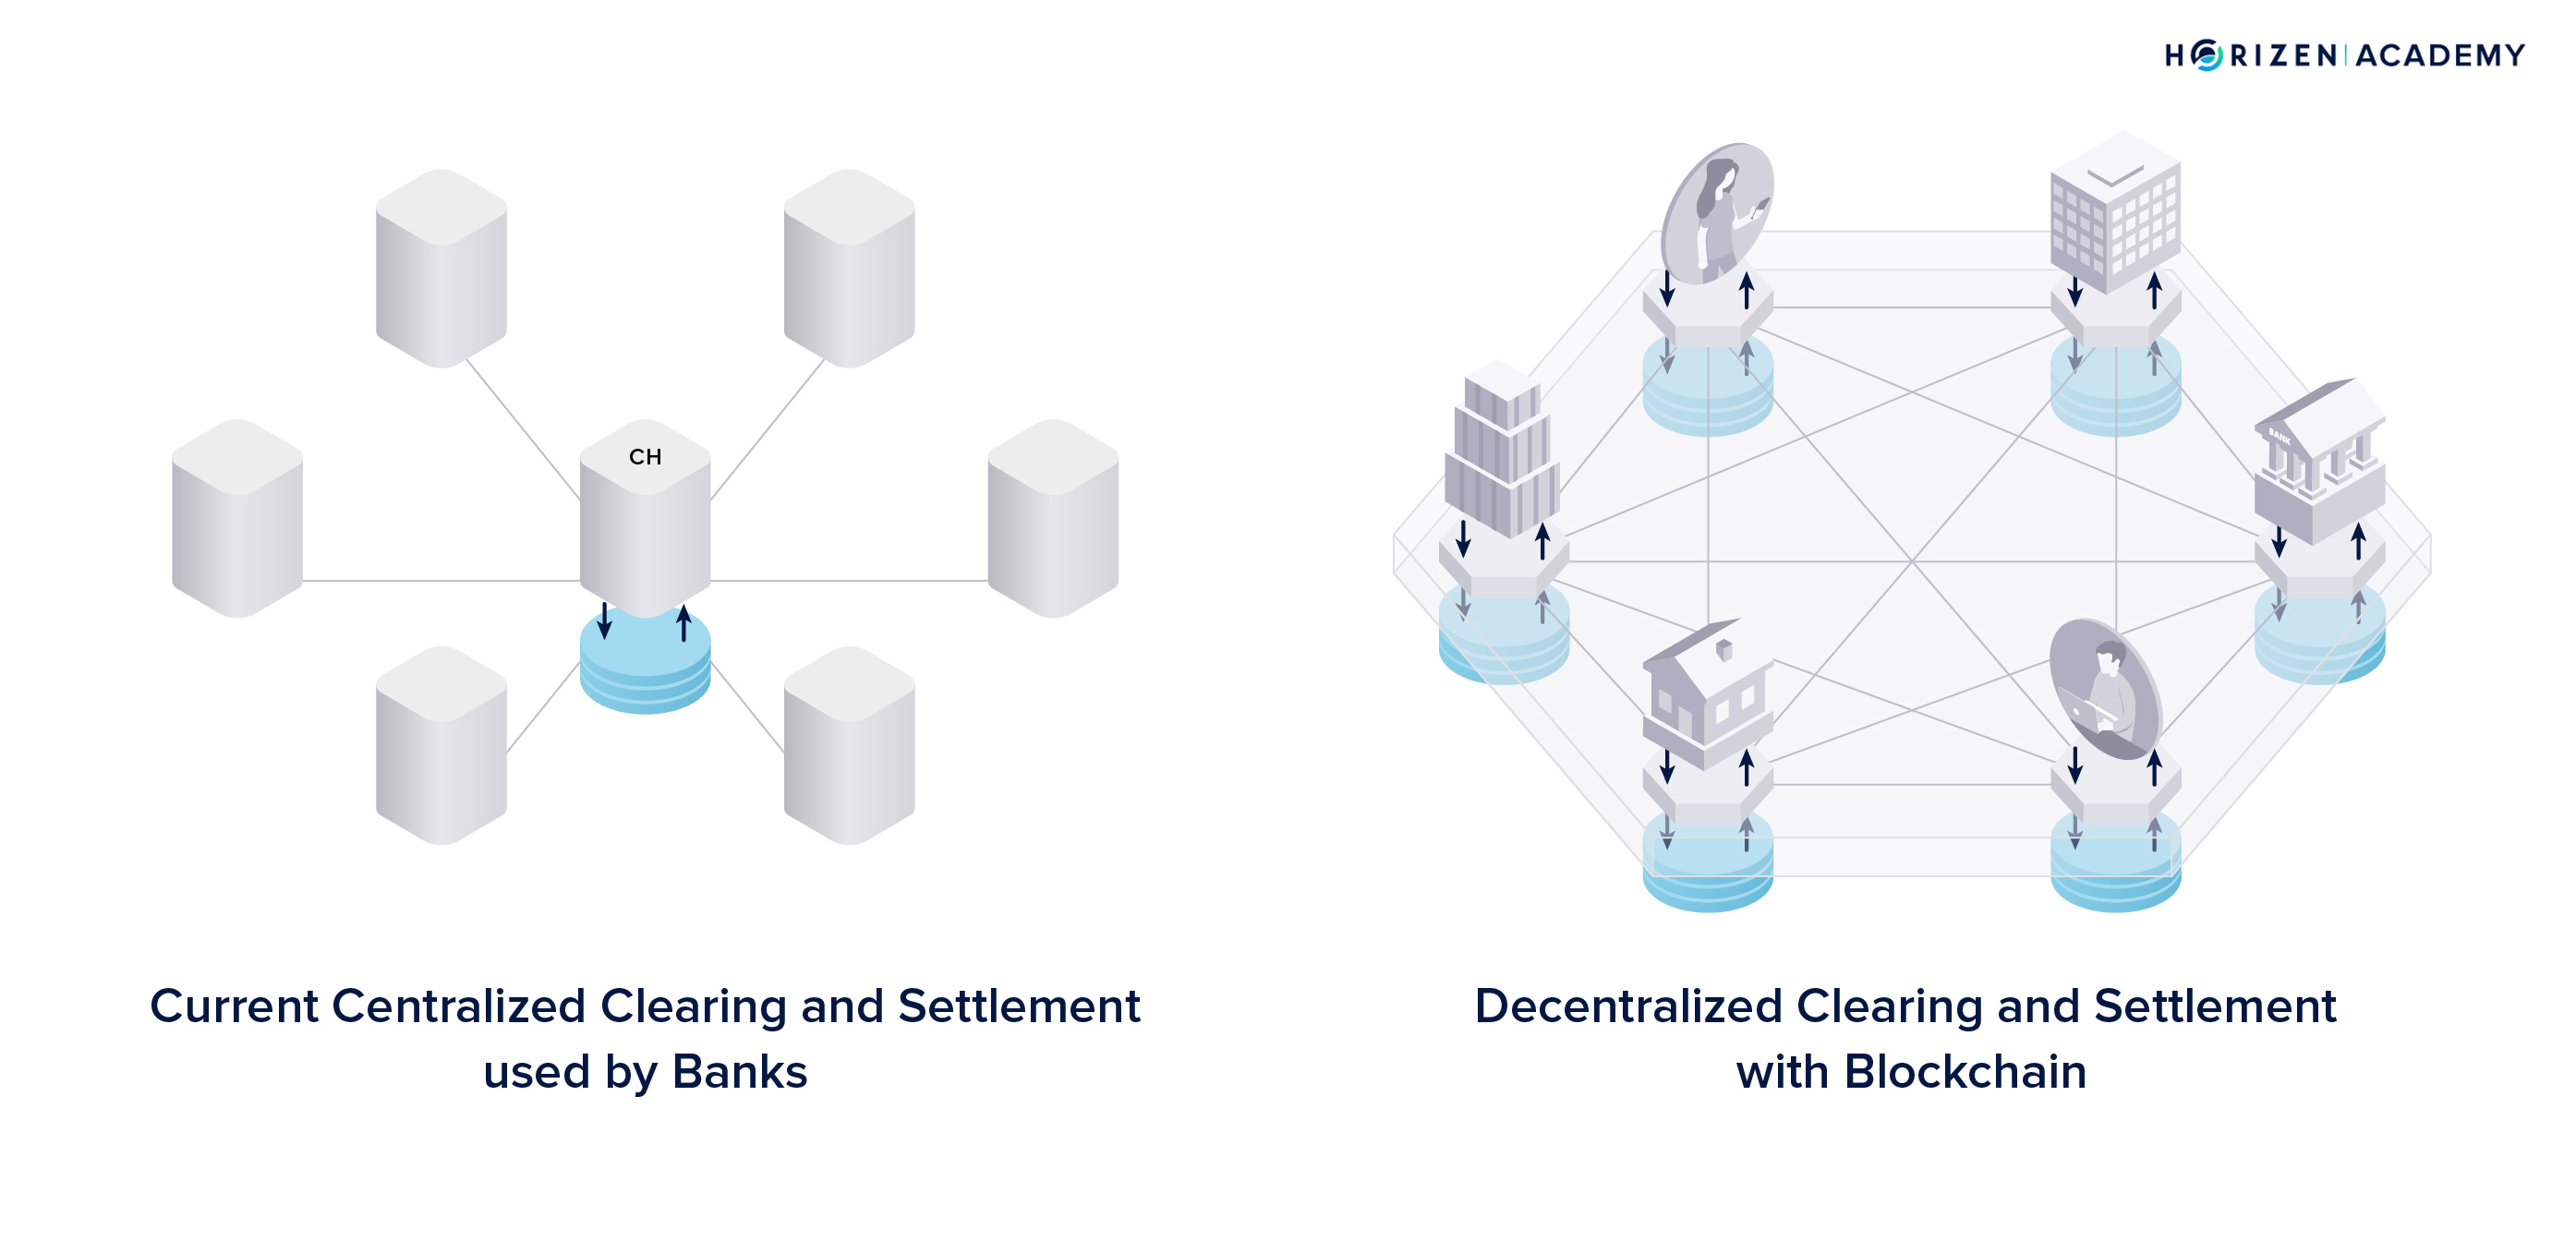 Decentralised clearing